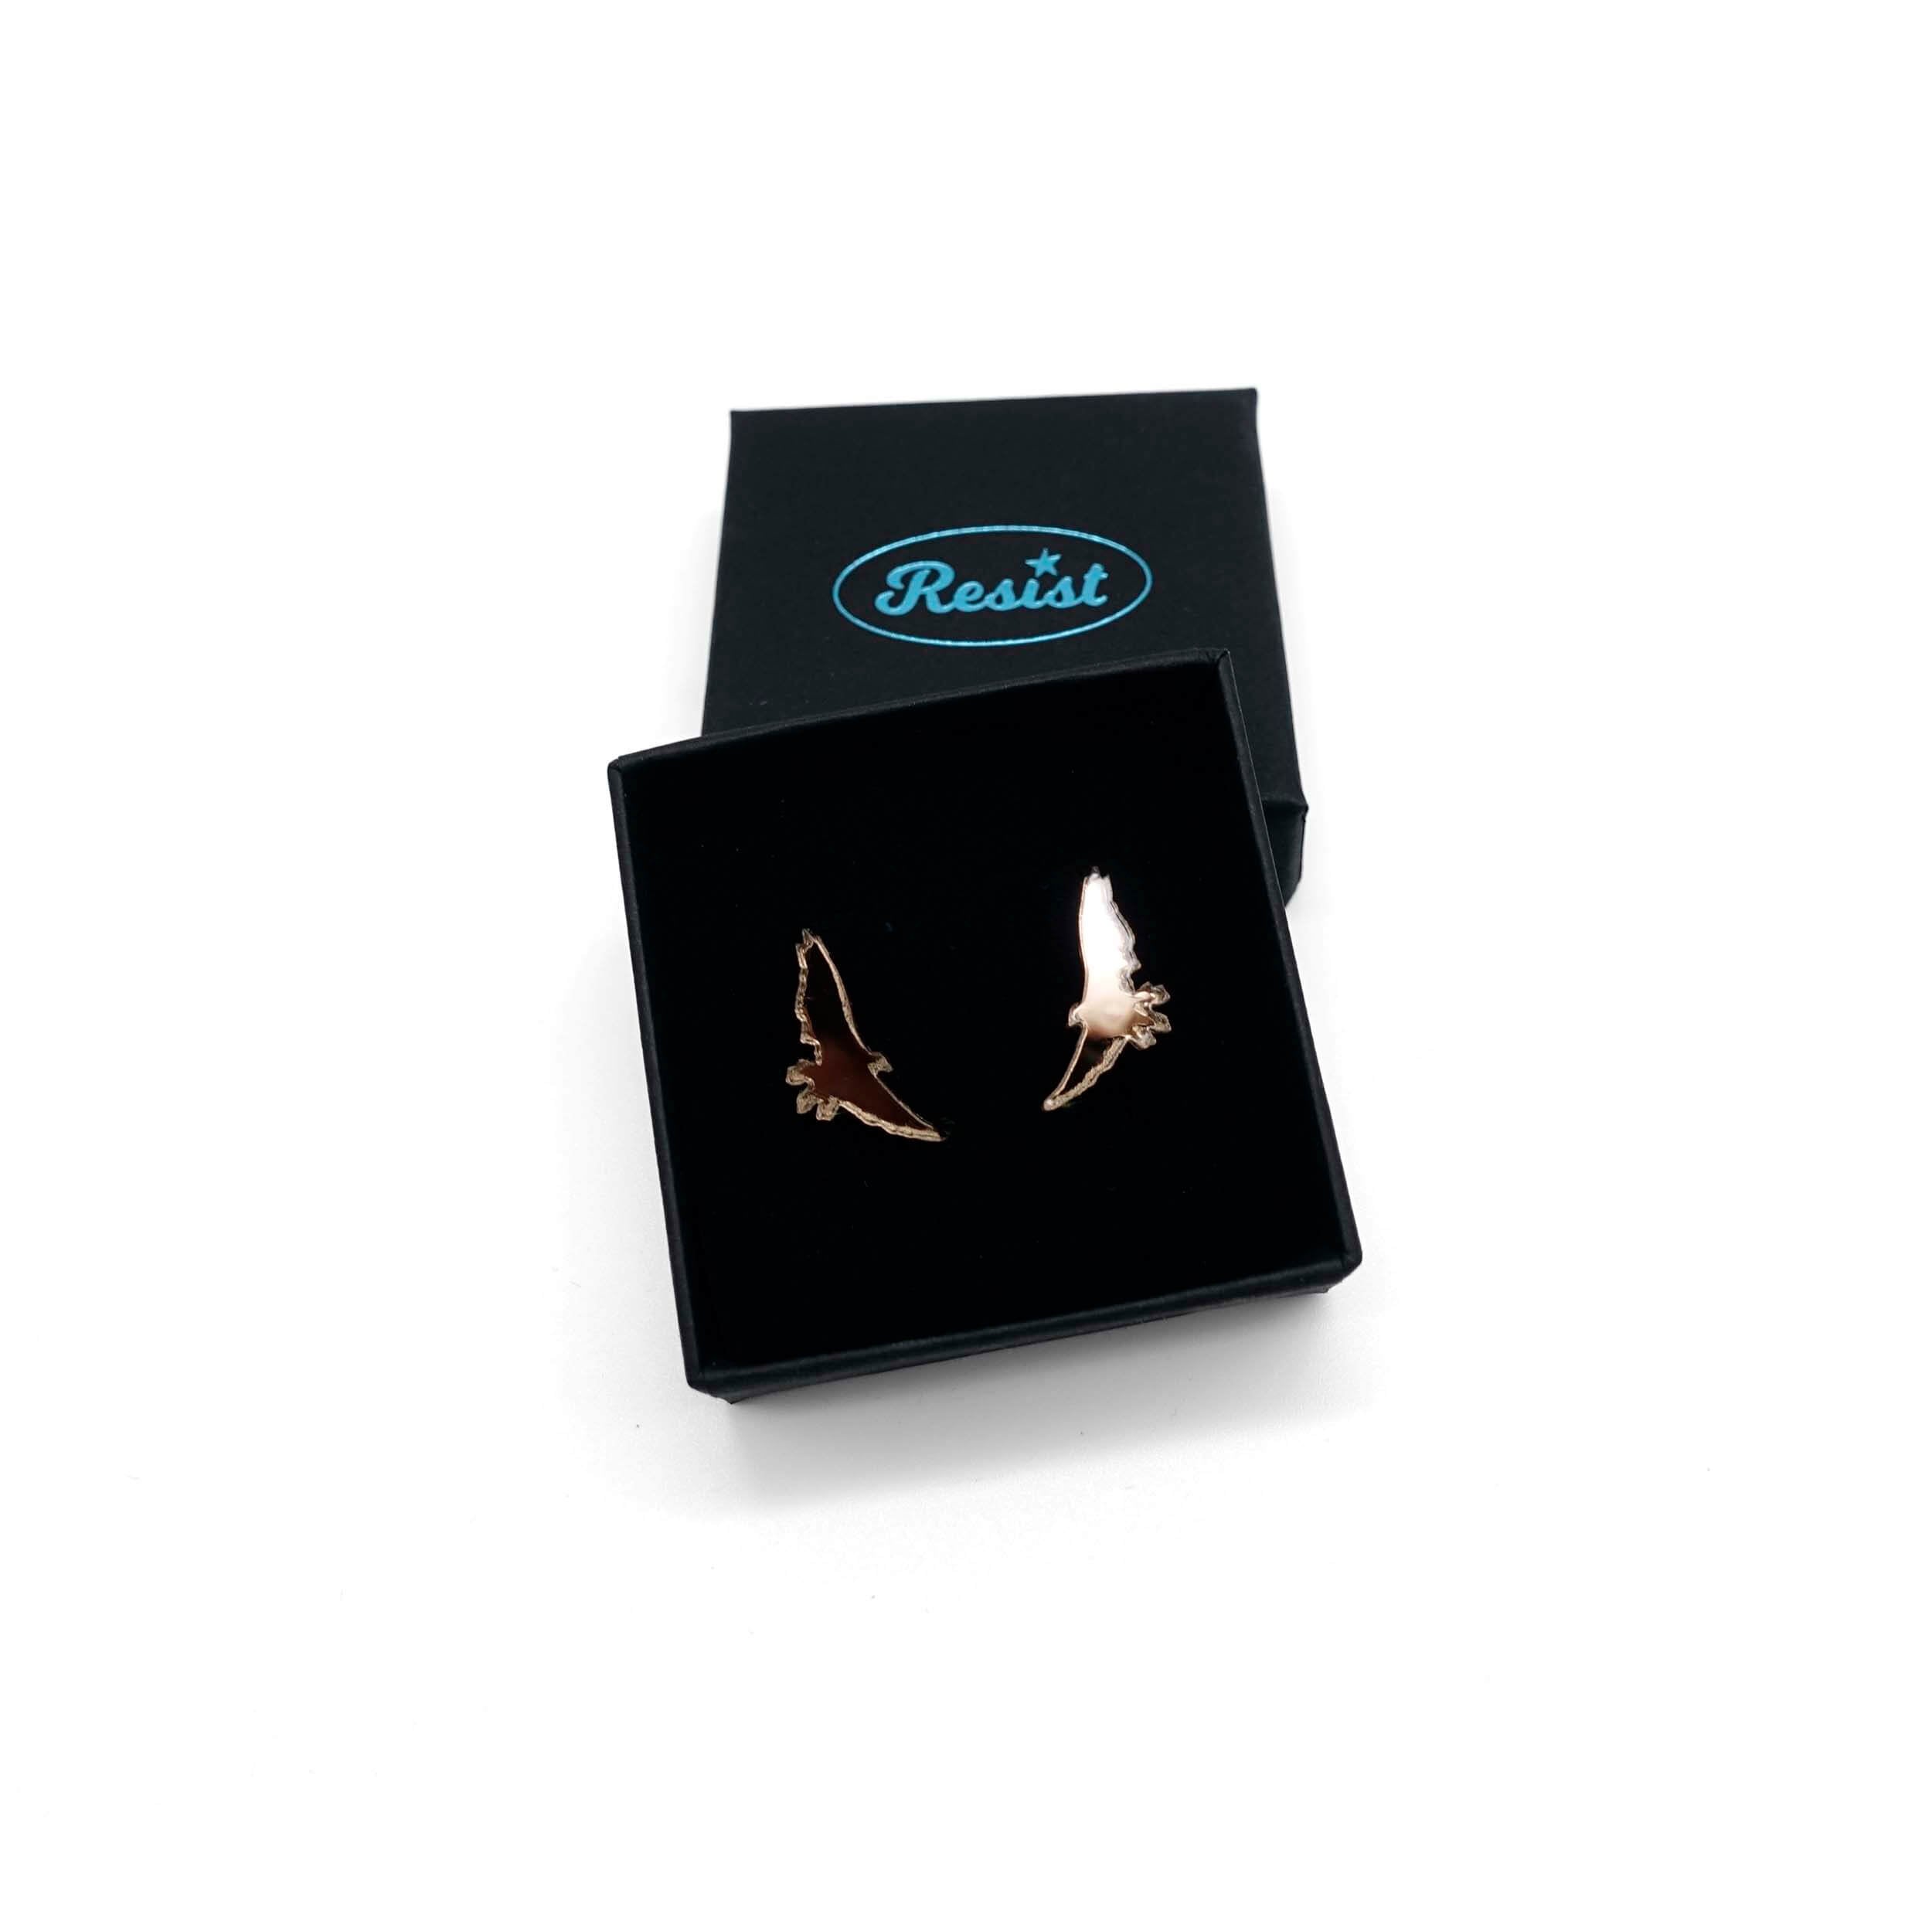 Bronze mirror bird stud earrings fromThe Brontë Collection, inspired by Jane Eyre's famous quote, 'I am no bird and no net ensnares me,' shown in a Wear and Resist gift box.